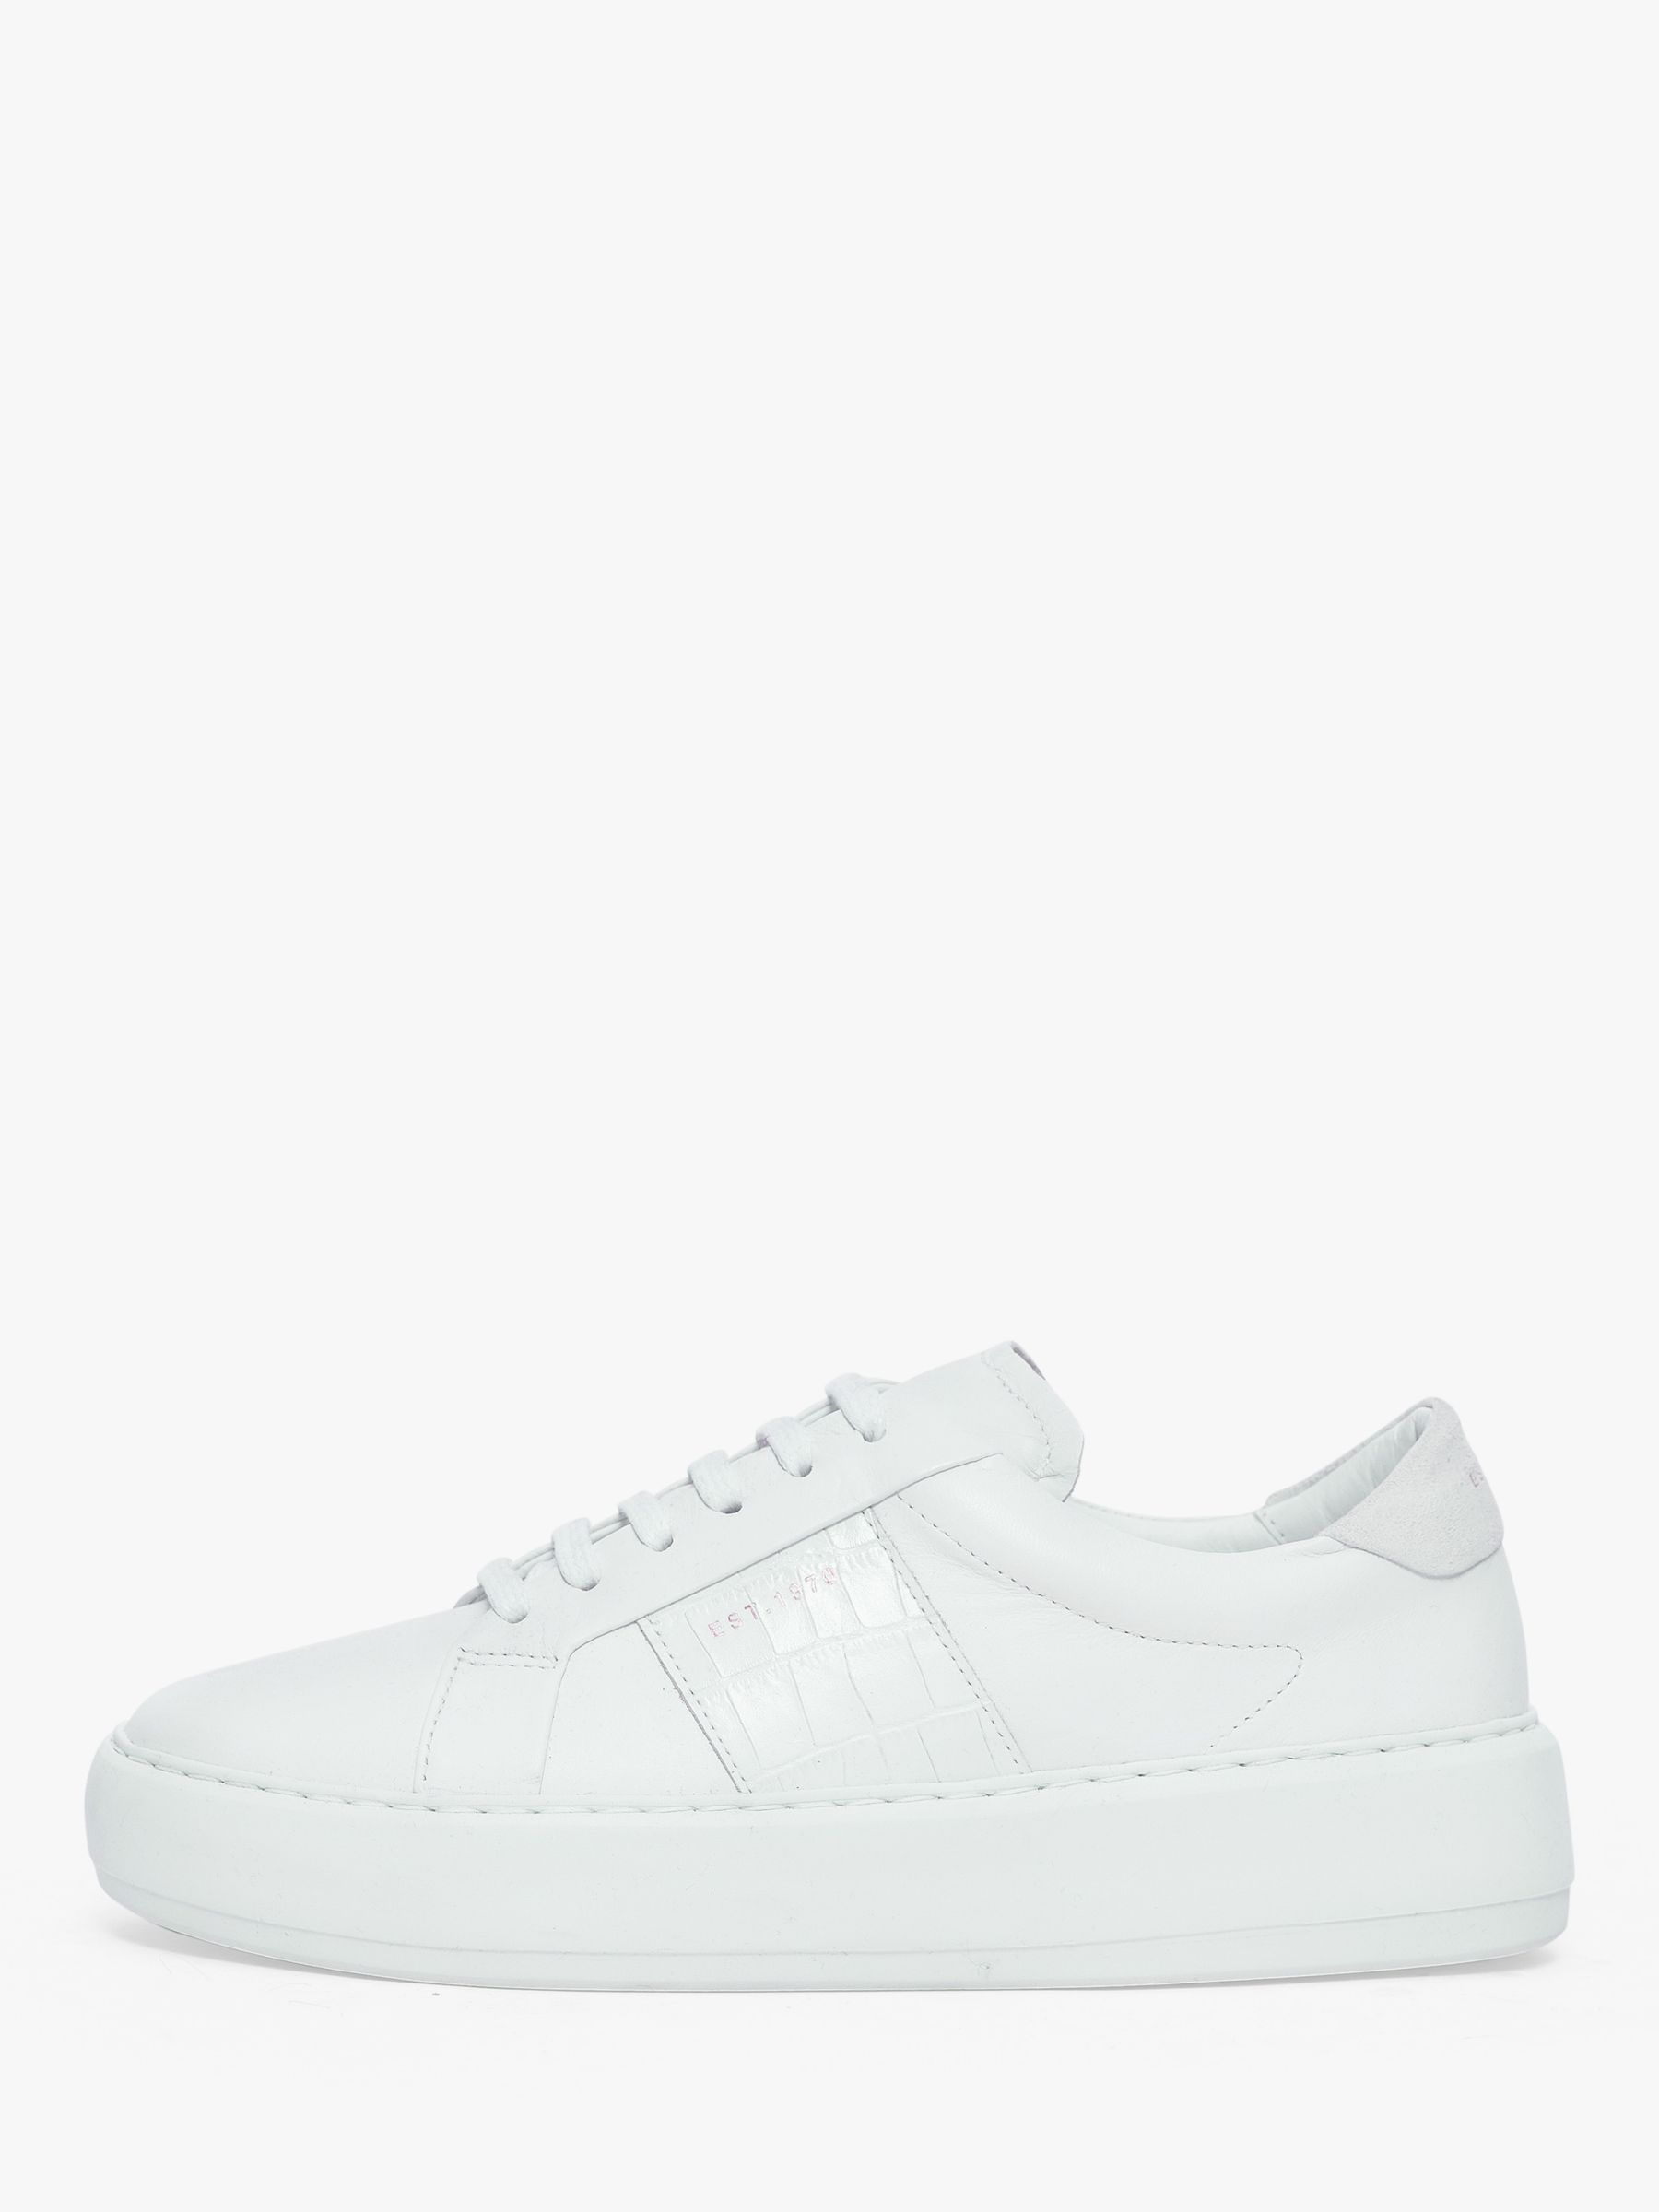 Jigsaw Riva Croc Leather Lace Up Trainers, White at John Lewis & Partners